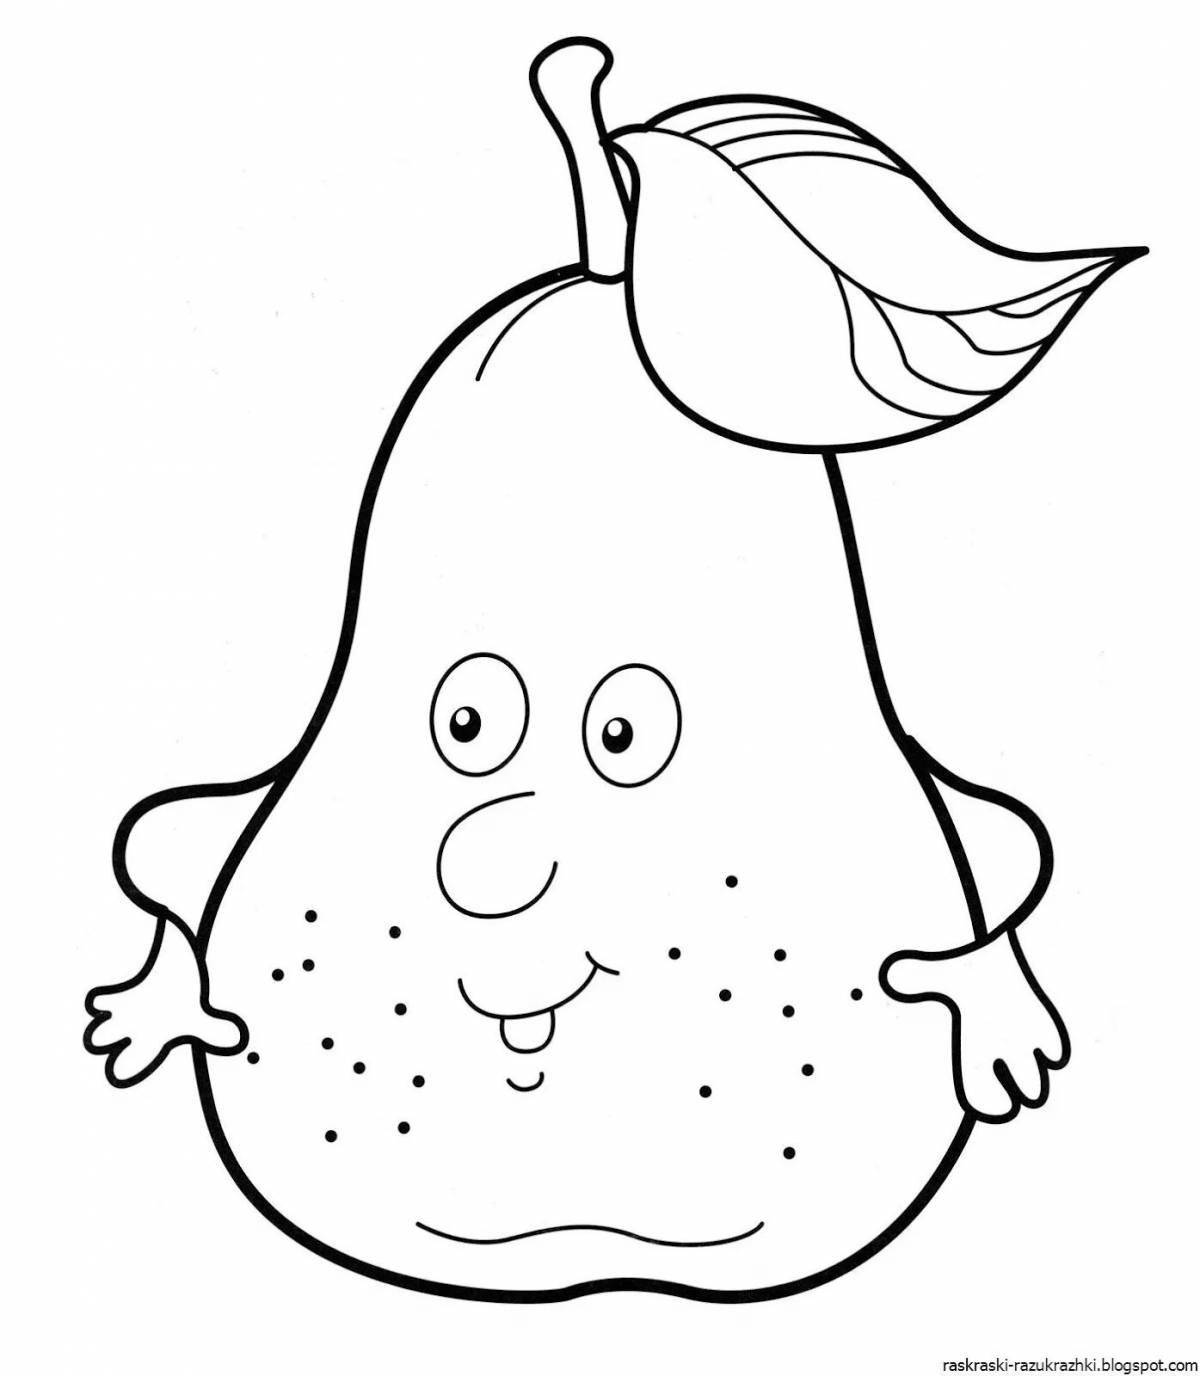 Attractive fruits and vegetables coloring pages for kids